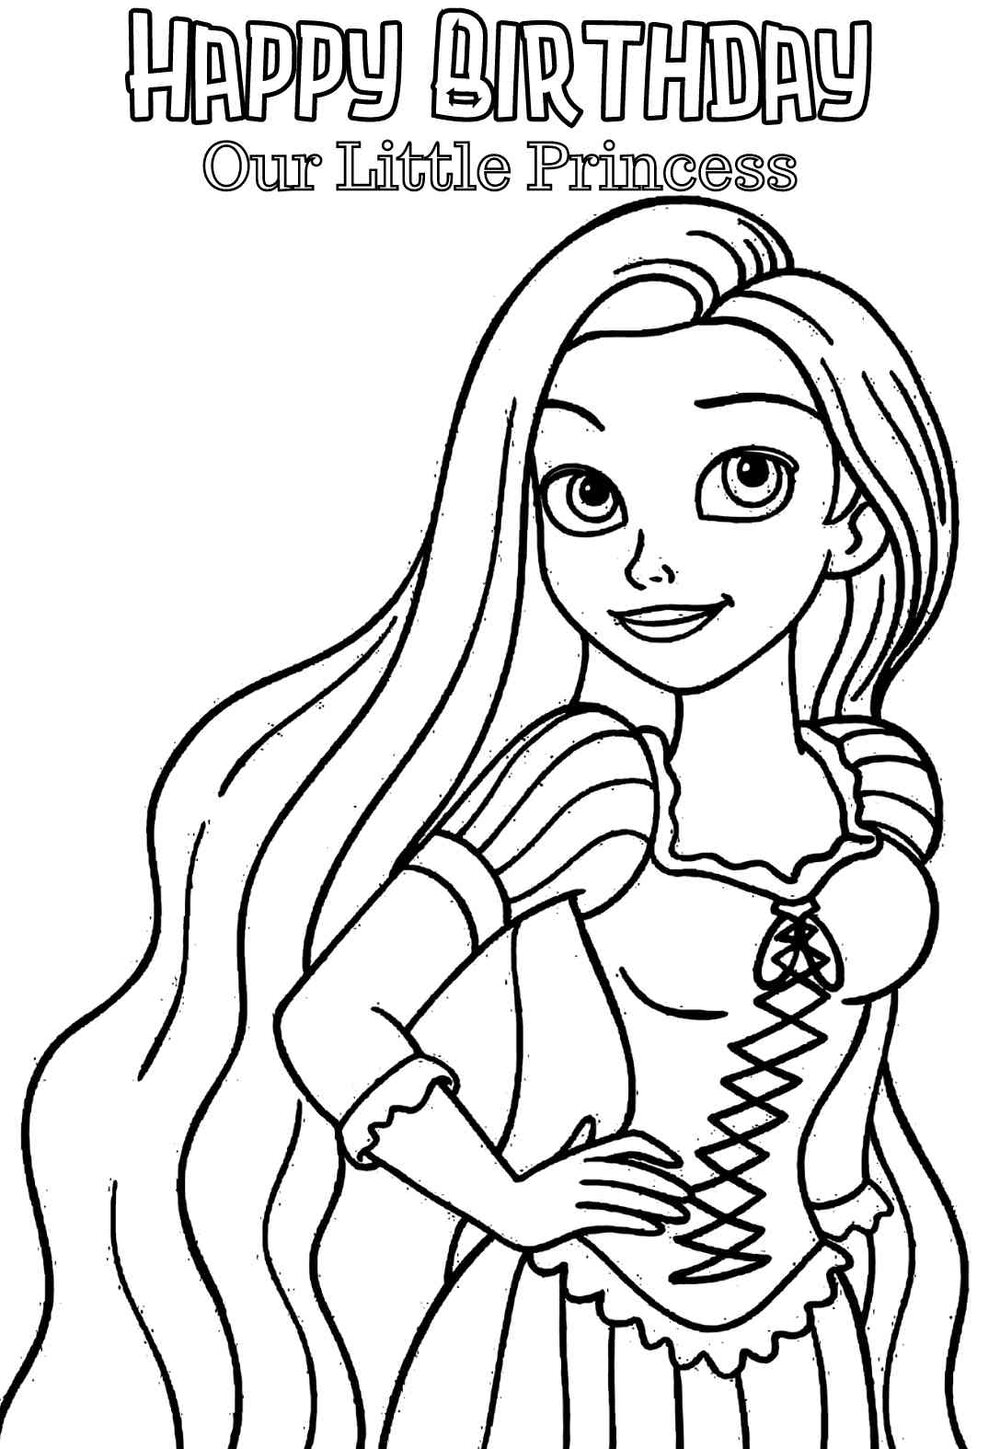 20+ Sensational Disney Birthday Coloring Pages & Cards free ...